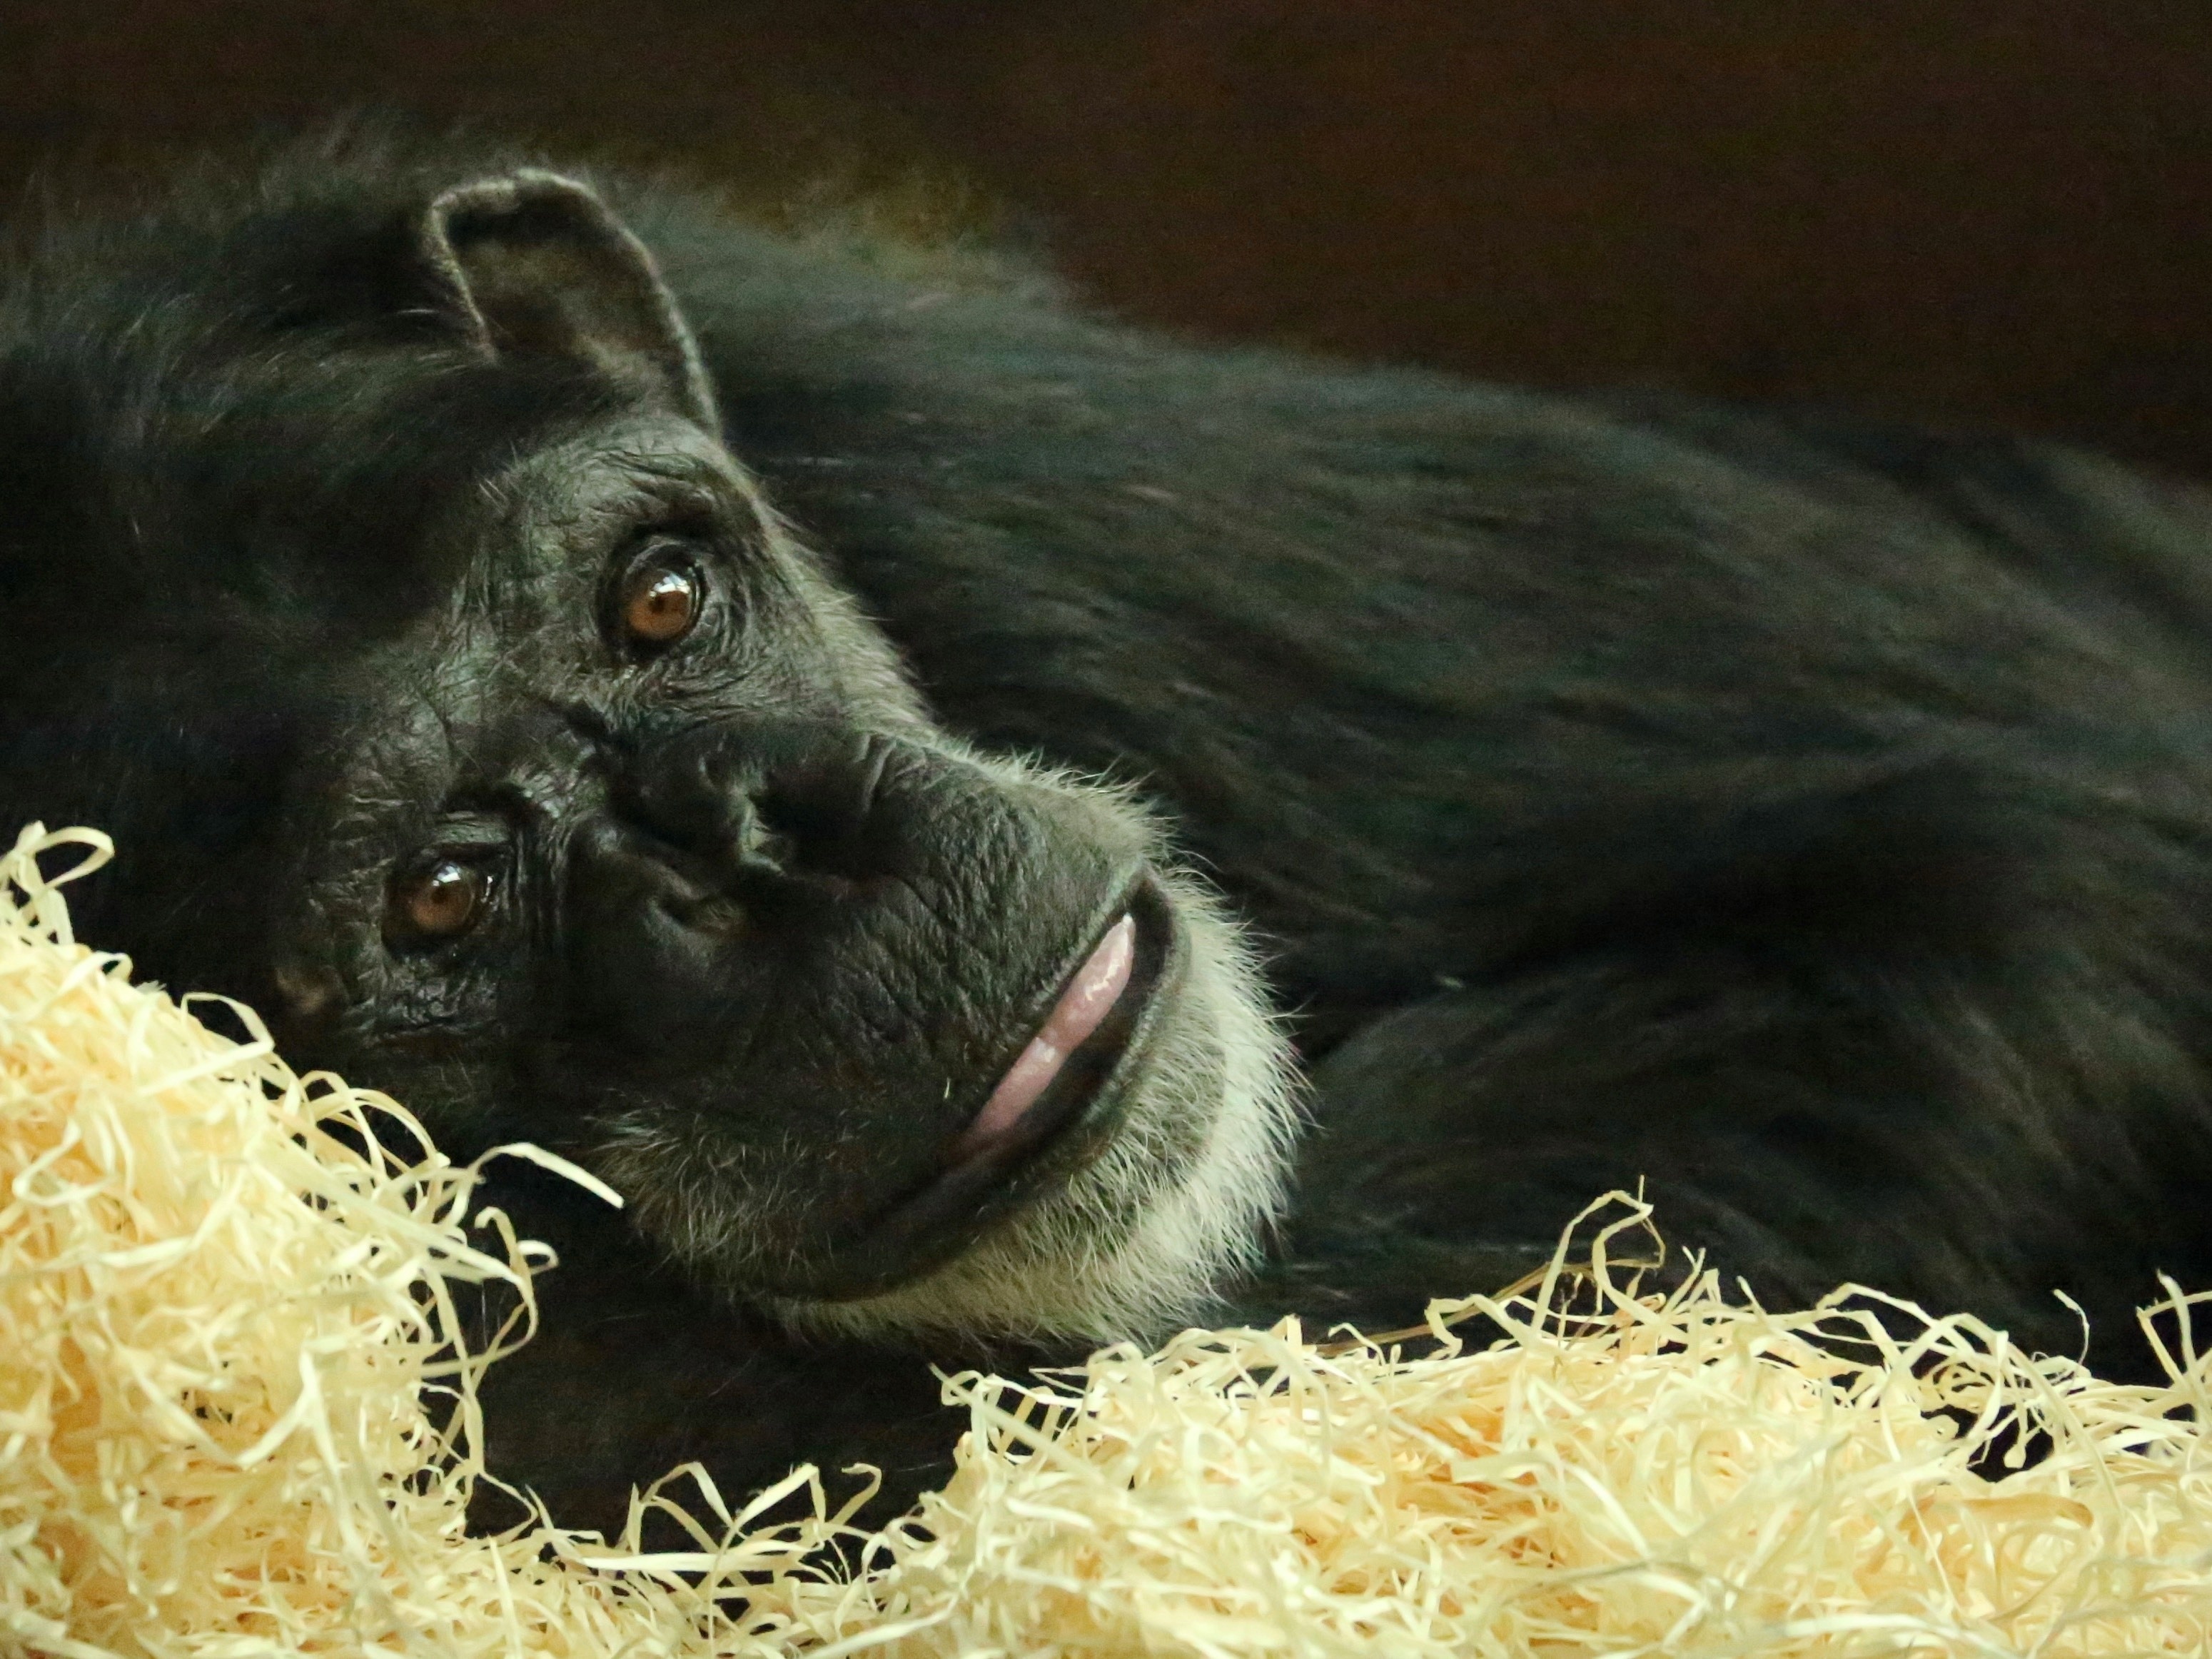 The lovely chimpanzees called Freddy taking it easy.